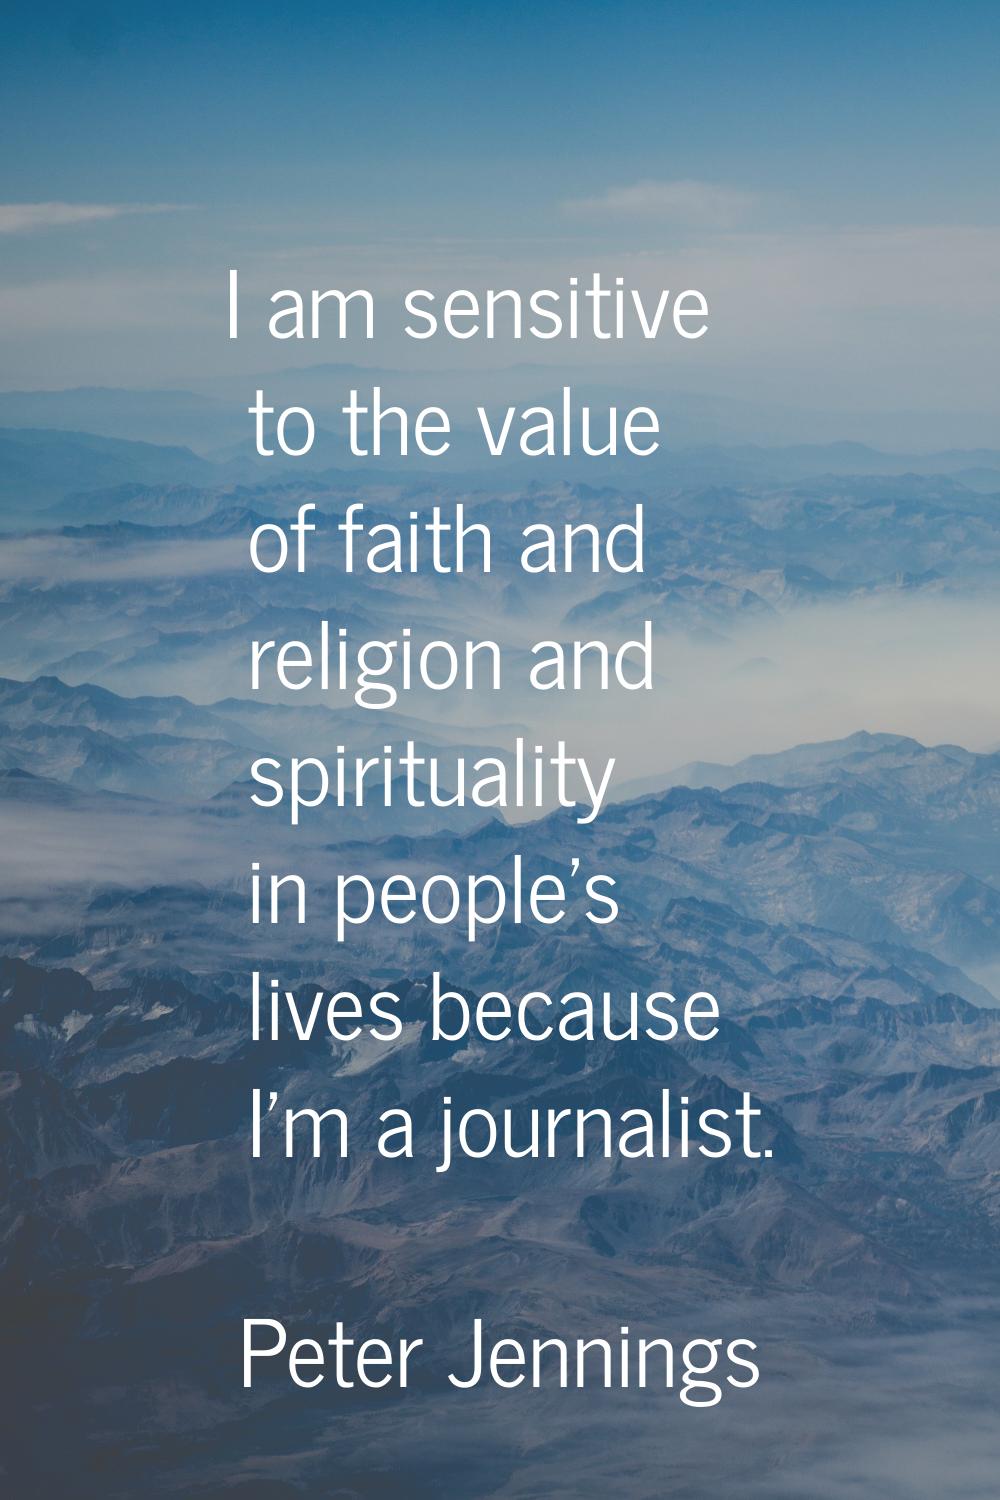 I am sensitive to the value of faith and religion and spirituality in people's lives because I'm a 